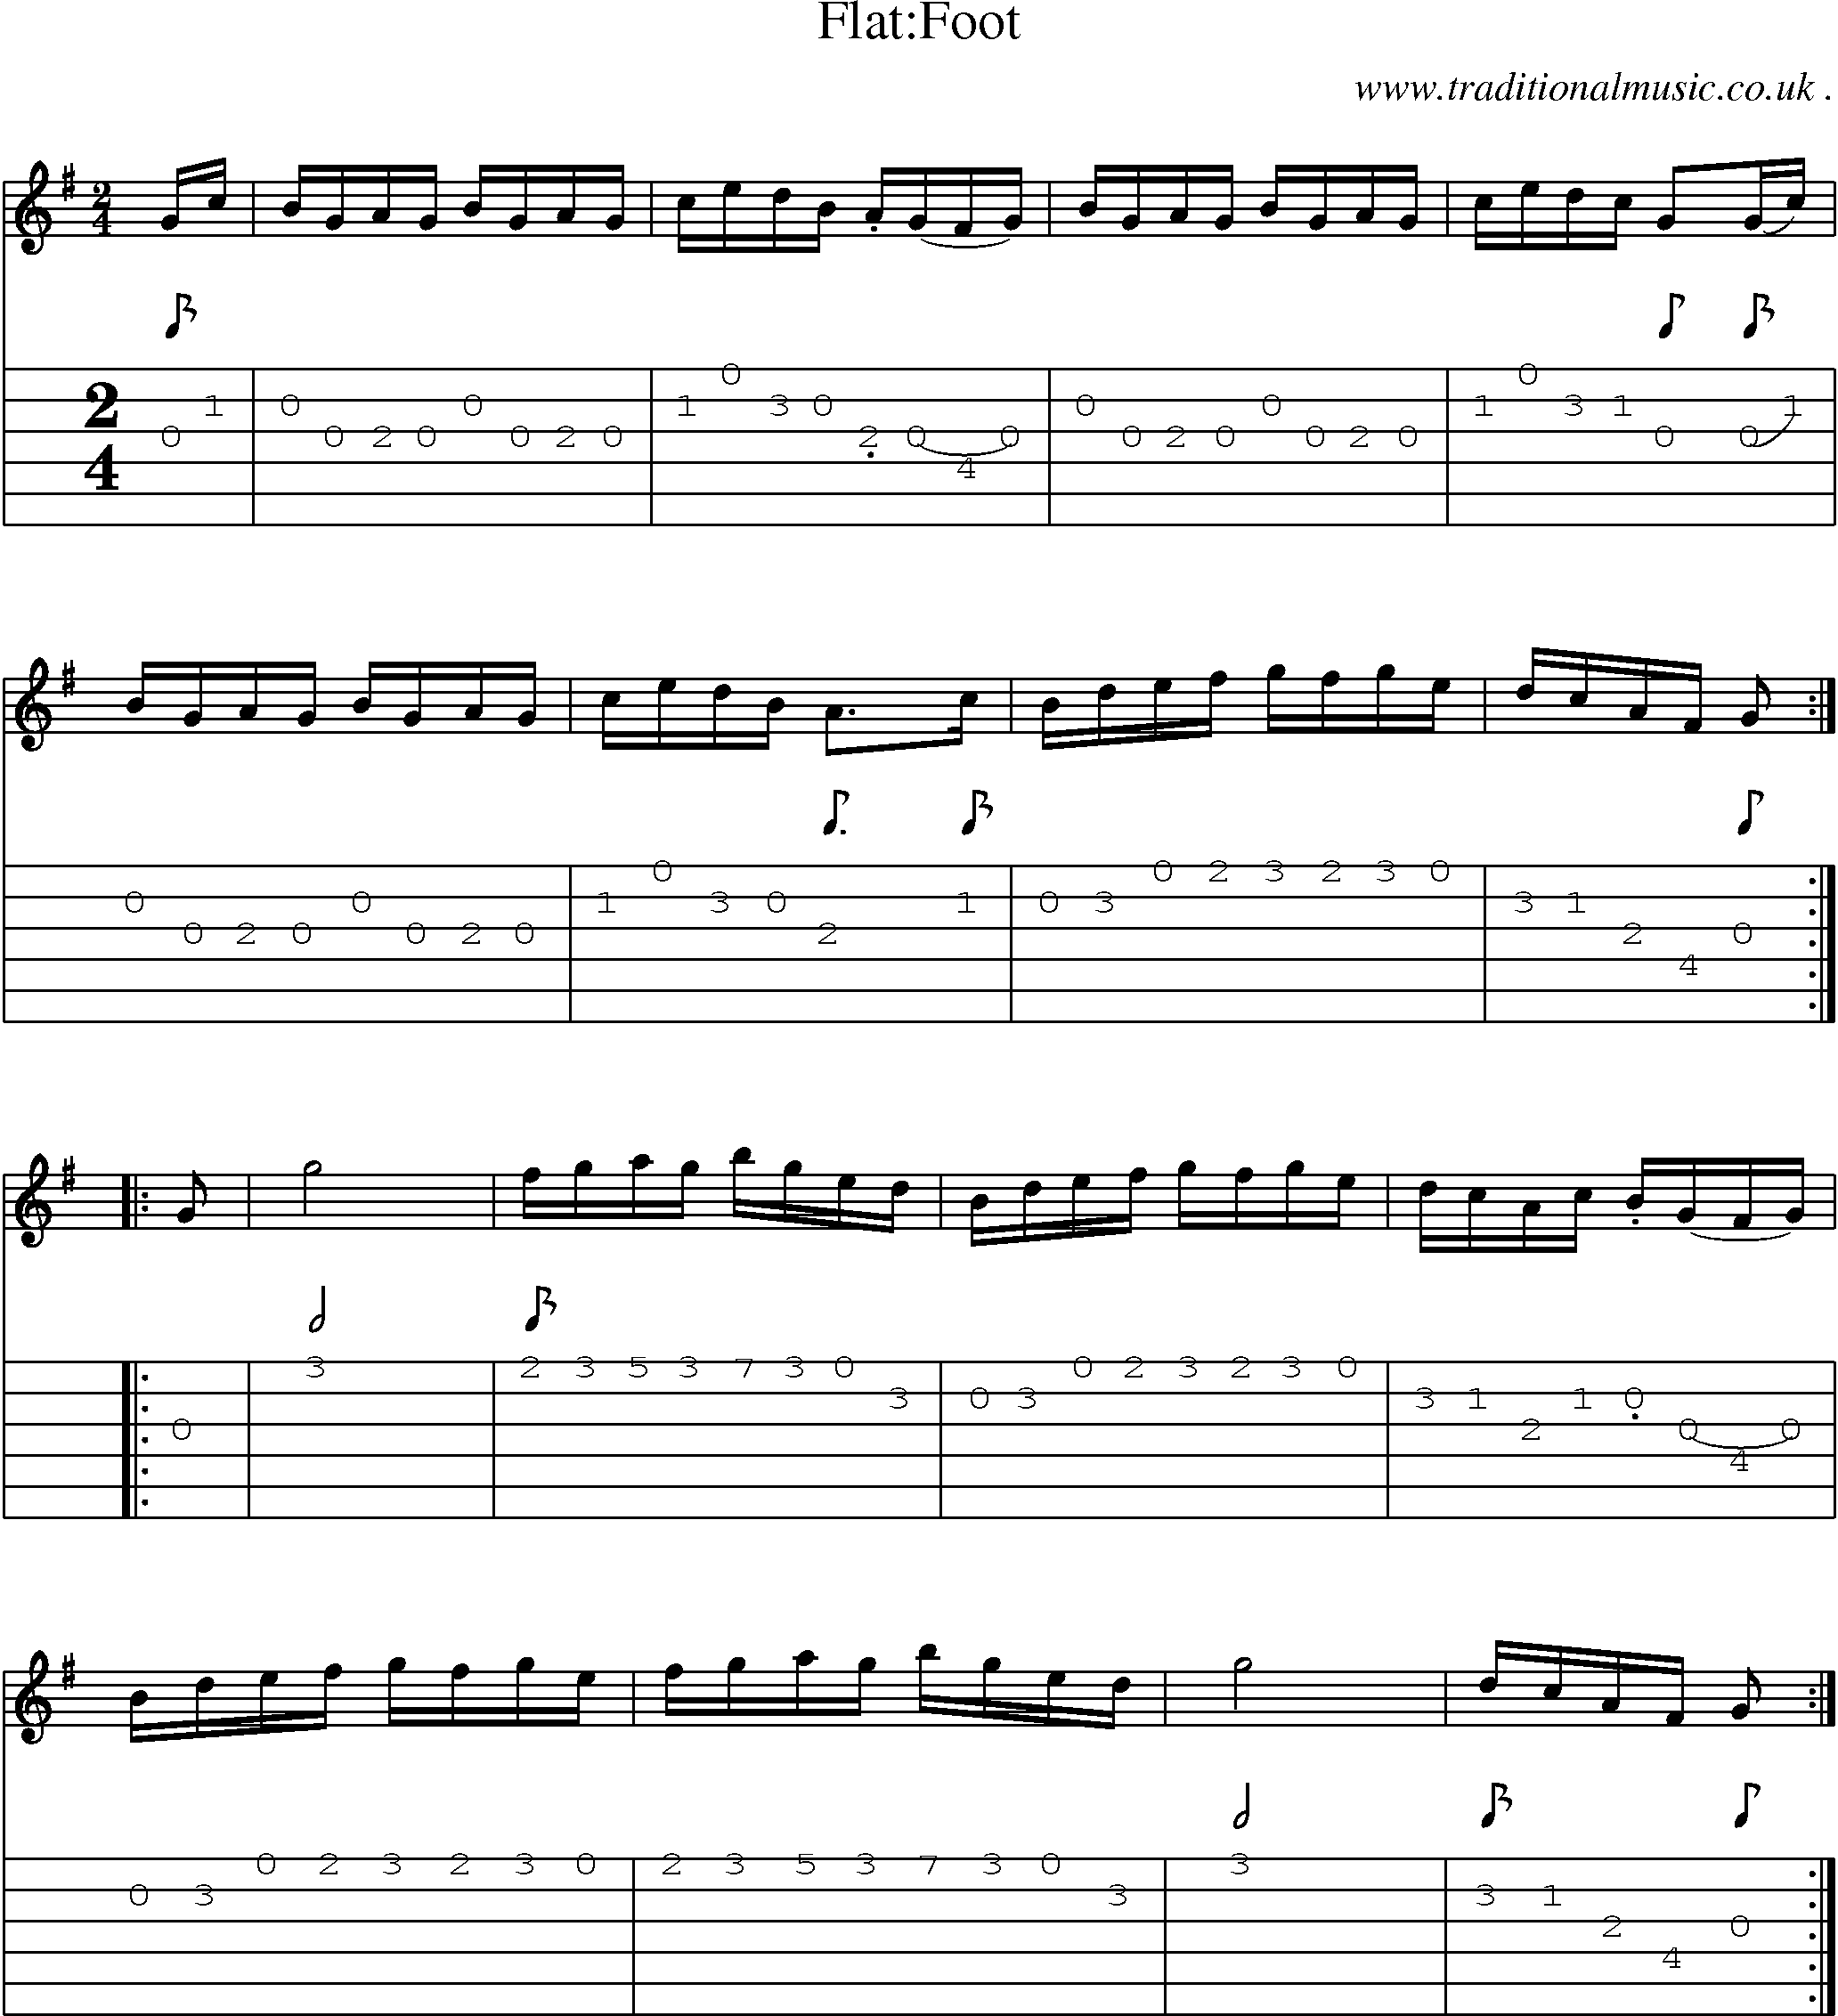 Sheet-Music and Guitar Tabs for Flatfoot